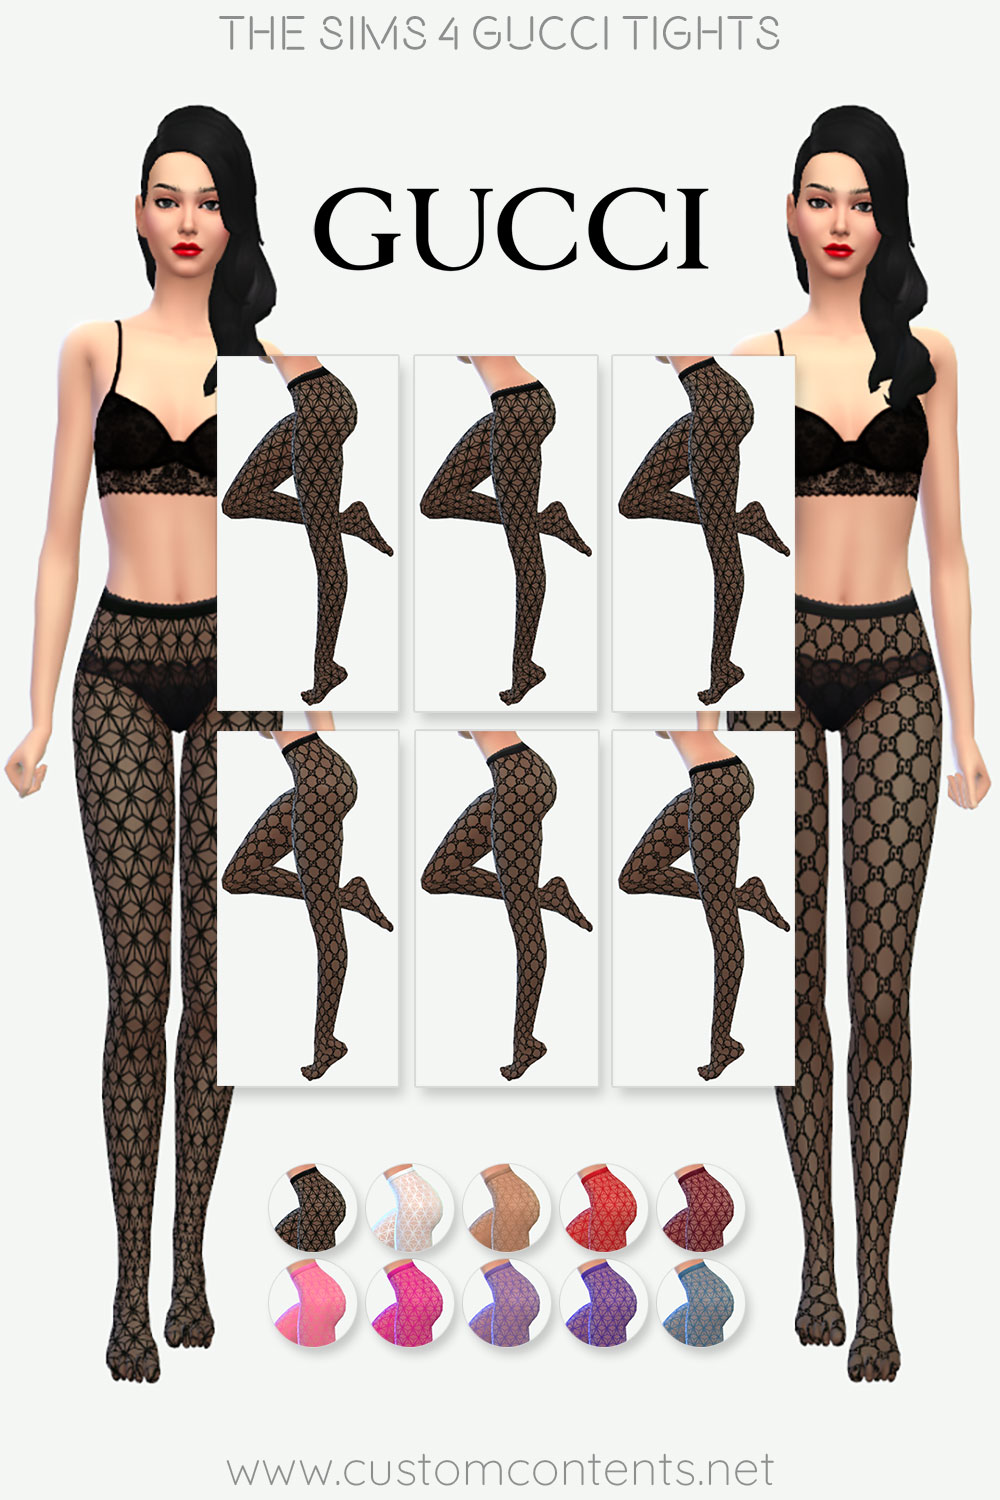 The Sims 4 Gucci Tights